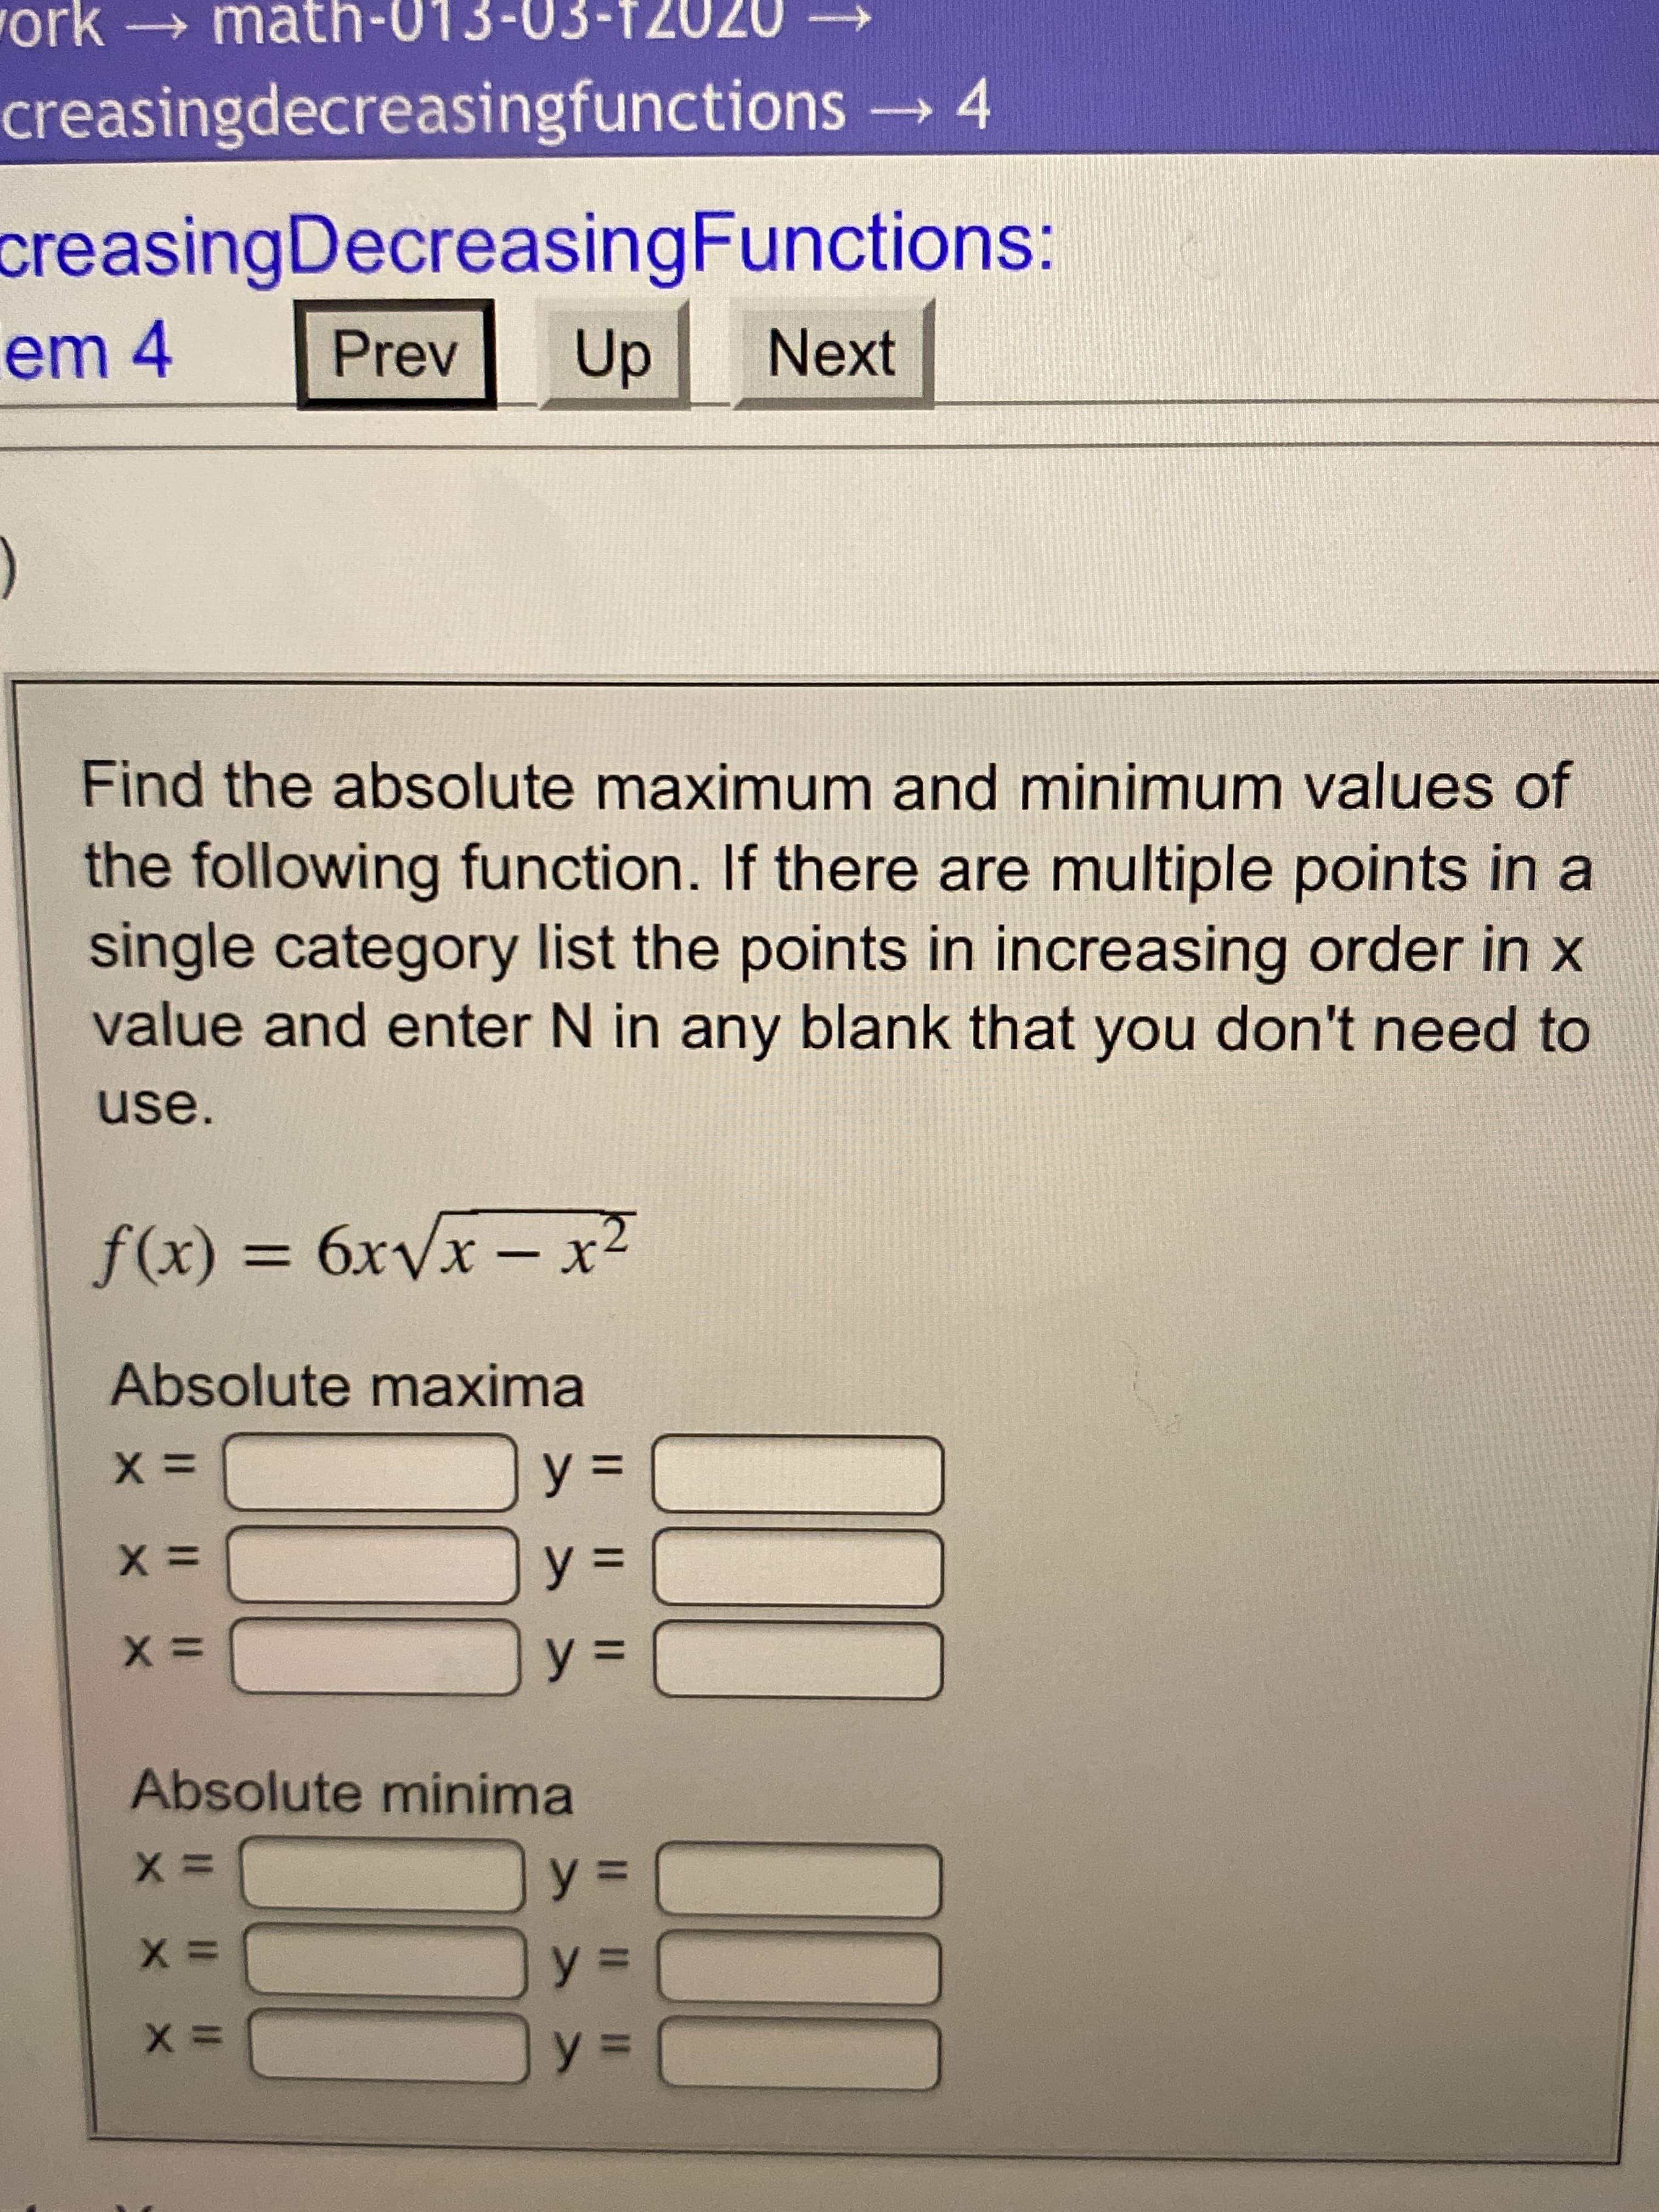 Find the absolute maximum and minimum values of
the following function. If there are multiple points in a
